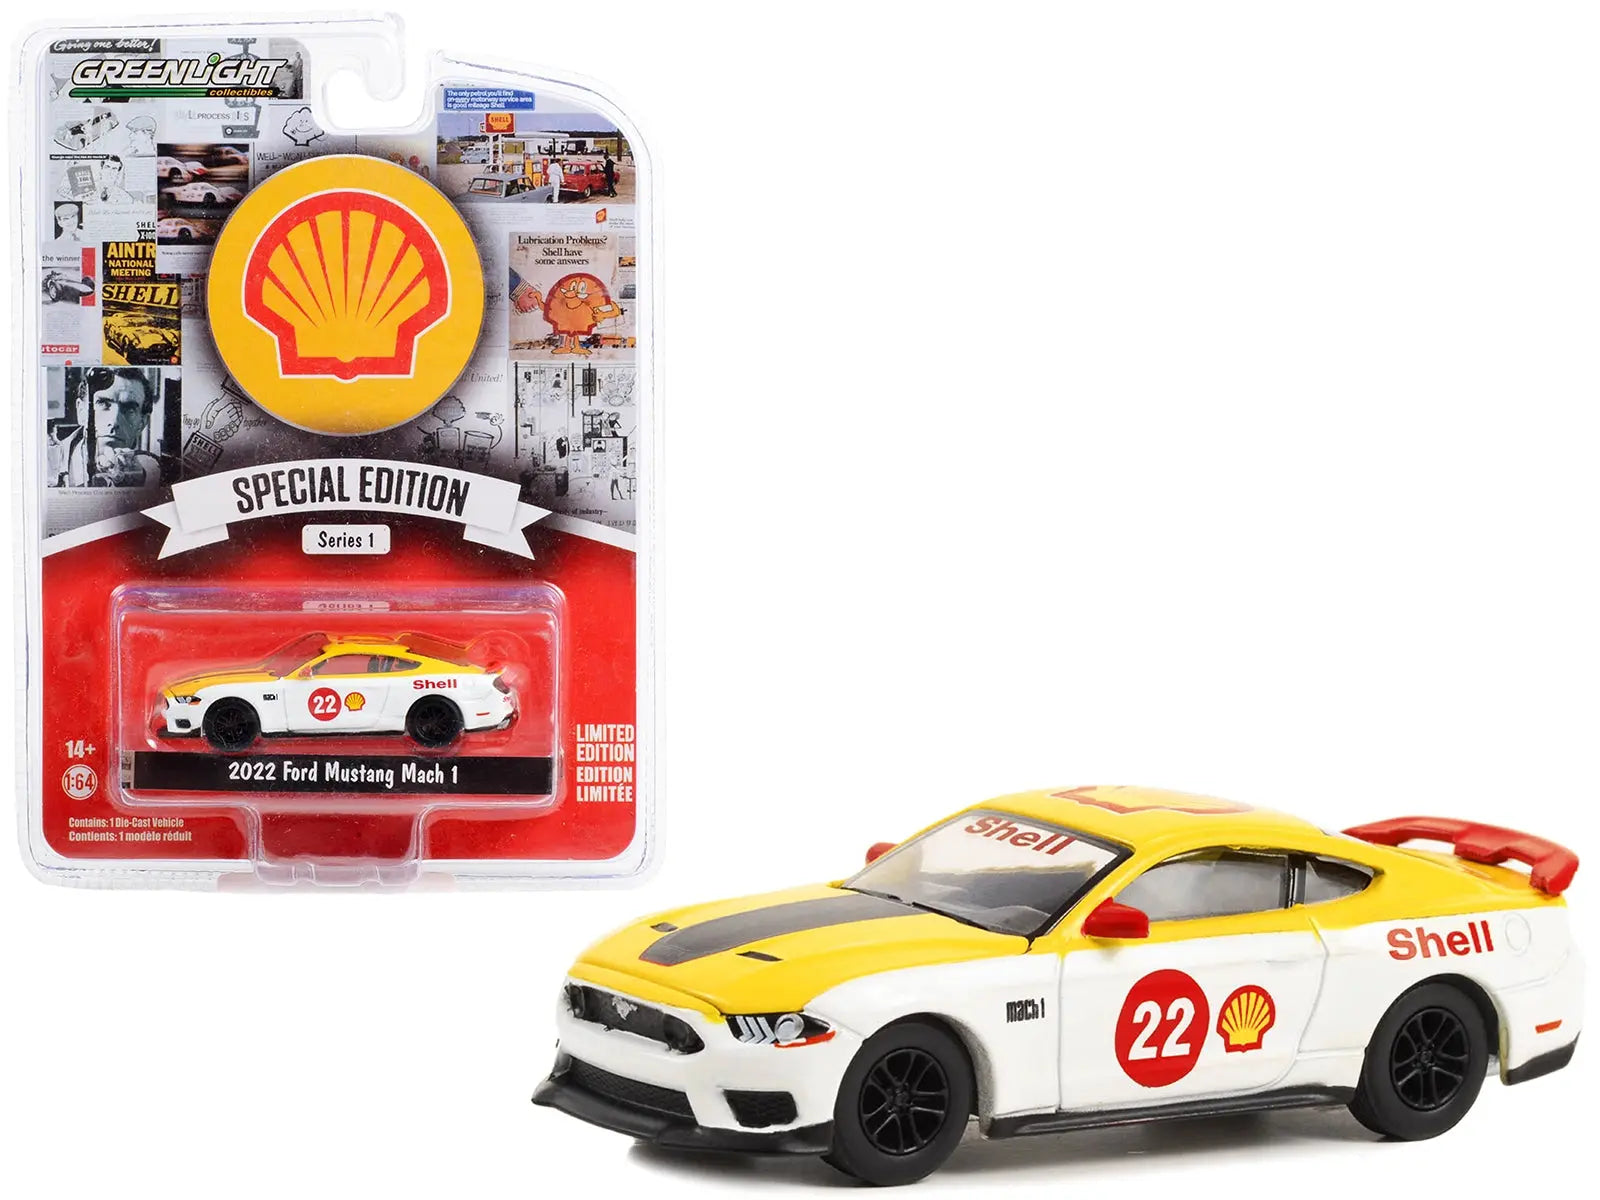 2022 Ford Mustang Mach 1 #22 Yellow and White "Shell Racing" "Shell Oil Special Edition" Series 1 1/64 Diecast Model Car by Greenlight Greenlight